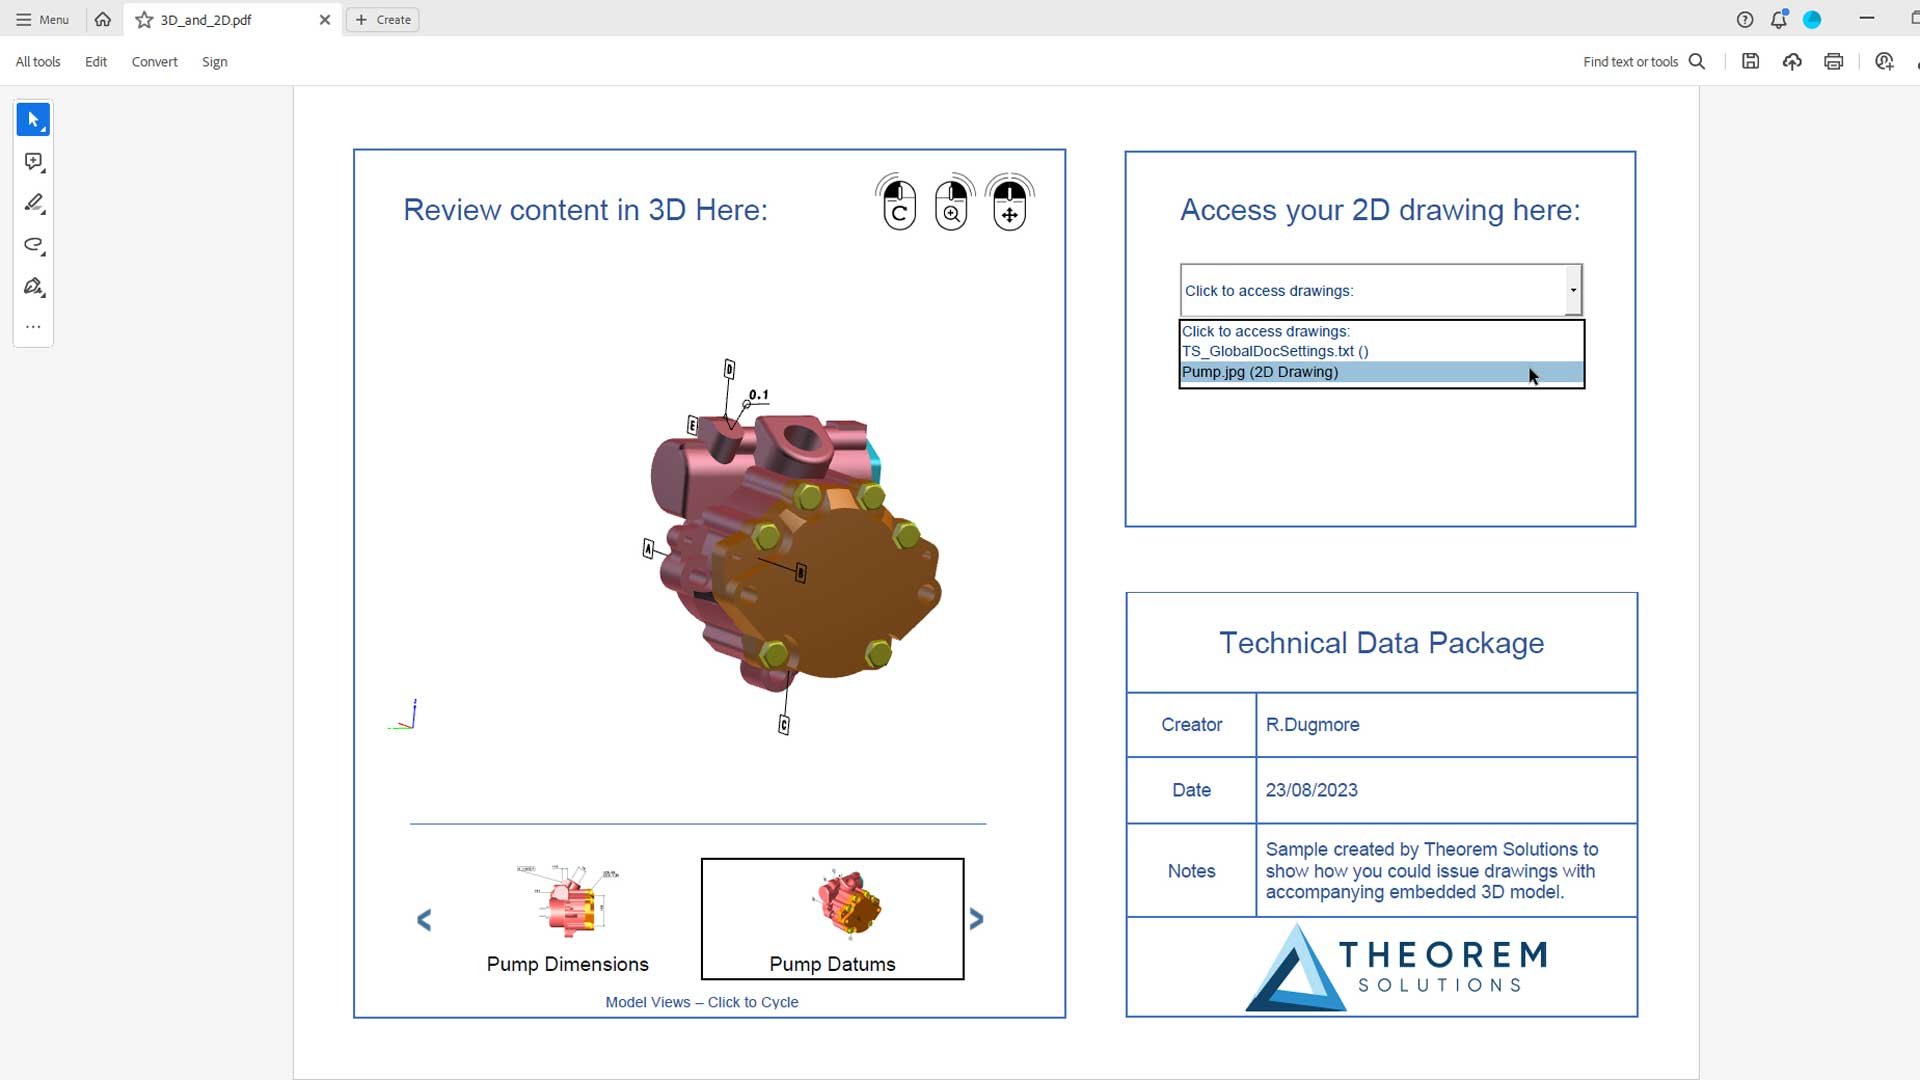 Combination of 3D and 2D data in a 3D PDF technical data package